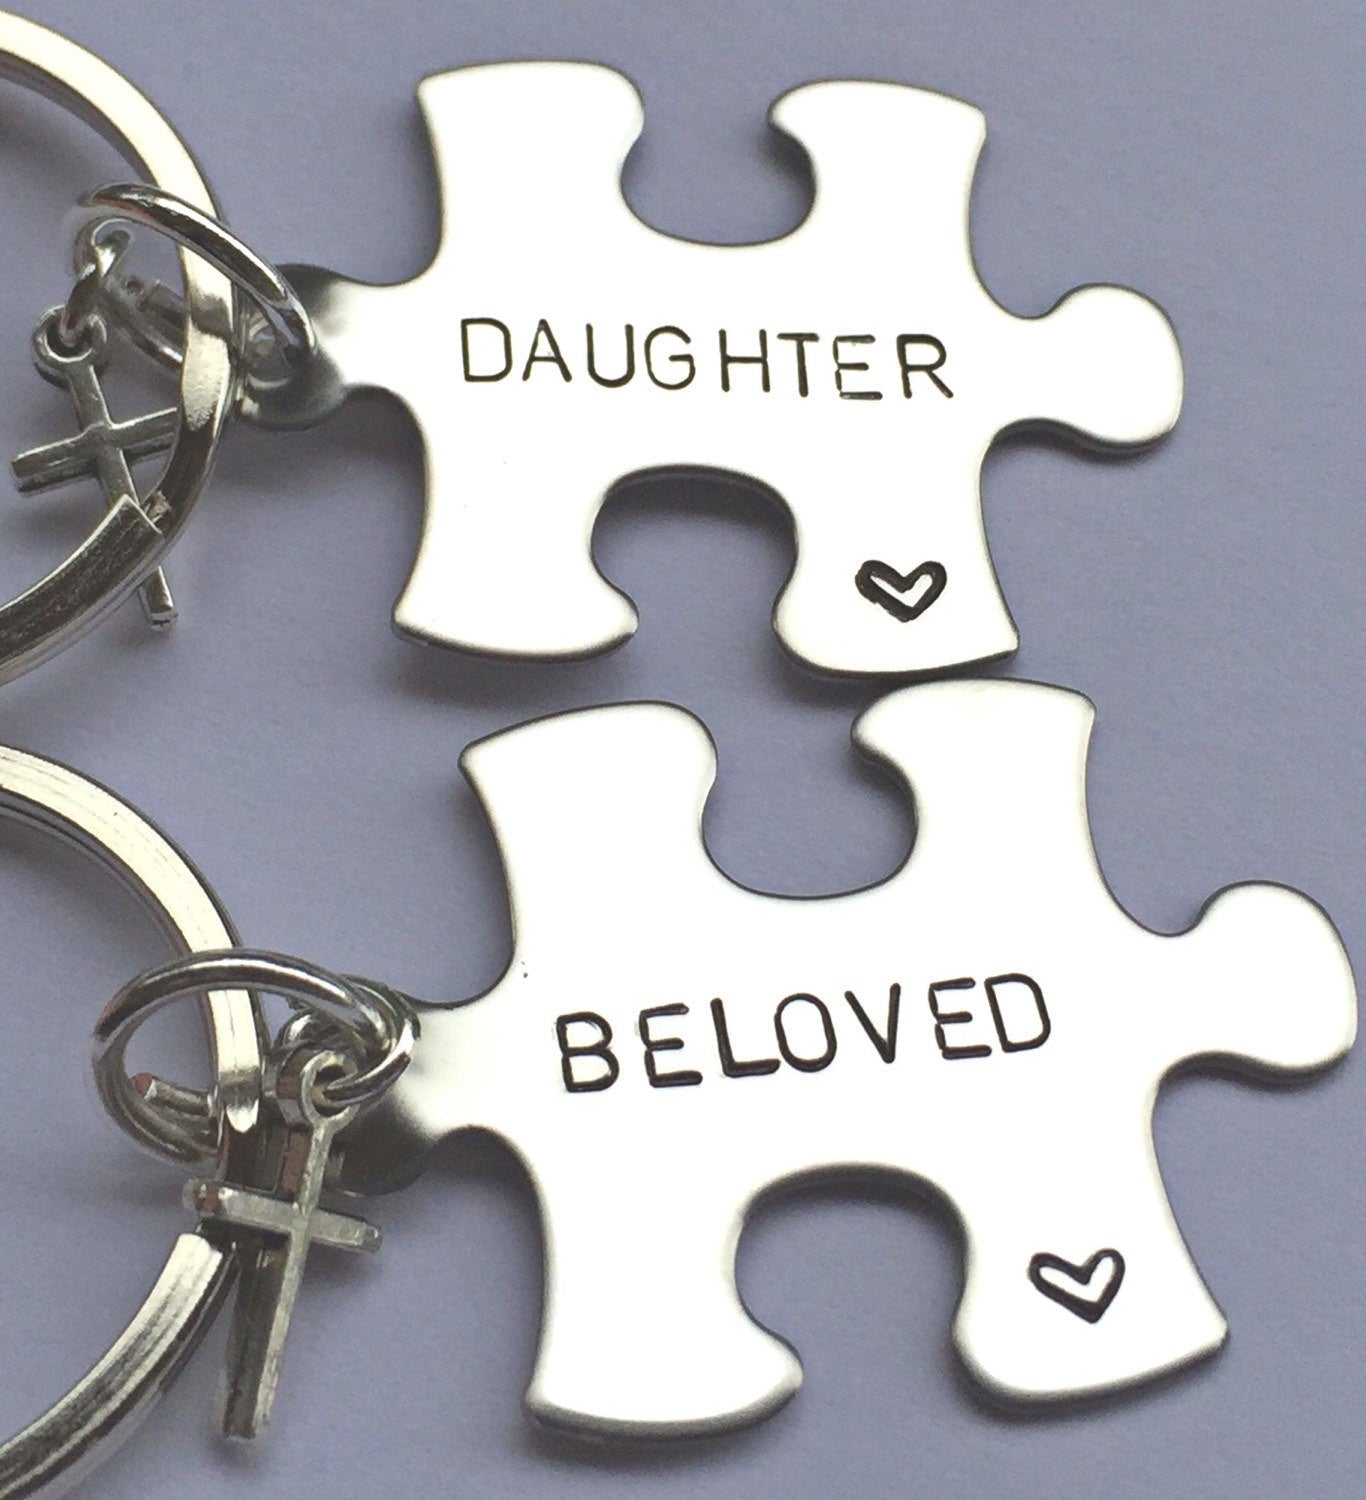 Mother Daughter Gifts,  Mother Daughter Keychain, Personalized Keychains, Valentine Gifts, natashaaloha - Natashaaloha, jewelry, bracelets, necklace, keychains, fishing lures, gifts for men, charms, personalized, 